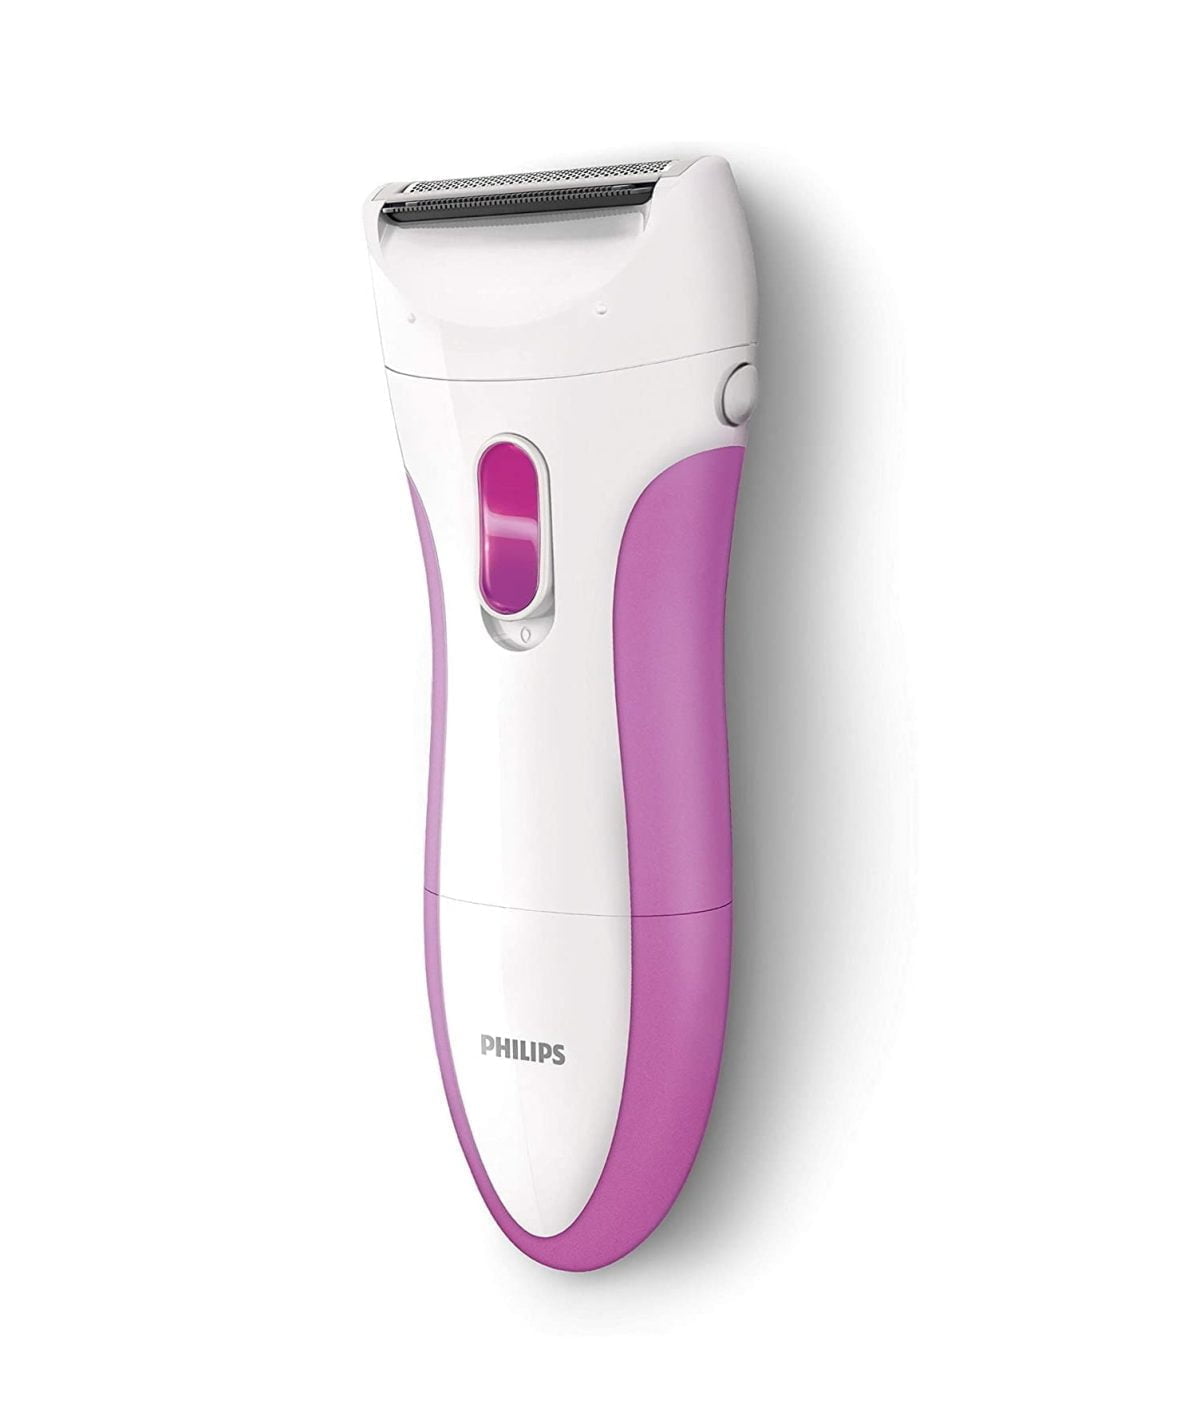 71H0Eeodal. Ac Sl1500 Philips &Lt;H1&Gt;Philips Hp6341 Lady Shaver - Wet &Amp; Dry&Lt;/H1&Gt; &Lt;P Class=&Quot;P-Heading-04-Large P-Heading-Bold P-Feature-Title&Quot;&Gt;Safe Shaving System For Ultimate Skin Protection The Gentle Small Shaving Head Protects Your Skin Leaving It Smooth And Soft Profiled, Ergonomic Grip For Comfortable Handling Wet &Amp; Dry For Use In Bath Or Shower For A Gentle And Comfortable Use During Your Shower Or Bath Routine With Anti Slip Grip For Optimal Wet &Amp; Dry Use.&Lt;/P&Gt; &Lt;Ul Class=&Quot;A-Unordered-List A-Vertical A-Spacing-Mini&Quot;&Gt; &Lt;Li&Gt;&Lt;Span Class=&Quot;A-List-Item&Quot;&Gt; Power Source:electric &Lt;/Span&Gt;&Lt;/Li&Gt; &Lt;Li&Gt;&Lt;Span Class=&Quot;A-List-Item&Quot;&Gt; Type:foil Shavers &Lt;/Span&Gt;&Lt;/Li&Gt; &Lt;Li&Gt;&Lt;Span Class=&Quot;A-List-Item&Quot;&Gt; Operating Function:dry &Lt;/Span&Gt;&Lt;/Li&Gt; &Lt;/Ul&Gt; Philips Lady Shaver 2000 Philips Lady Shaver 2000 - Hp6341